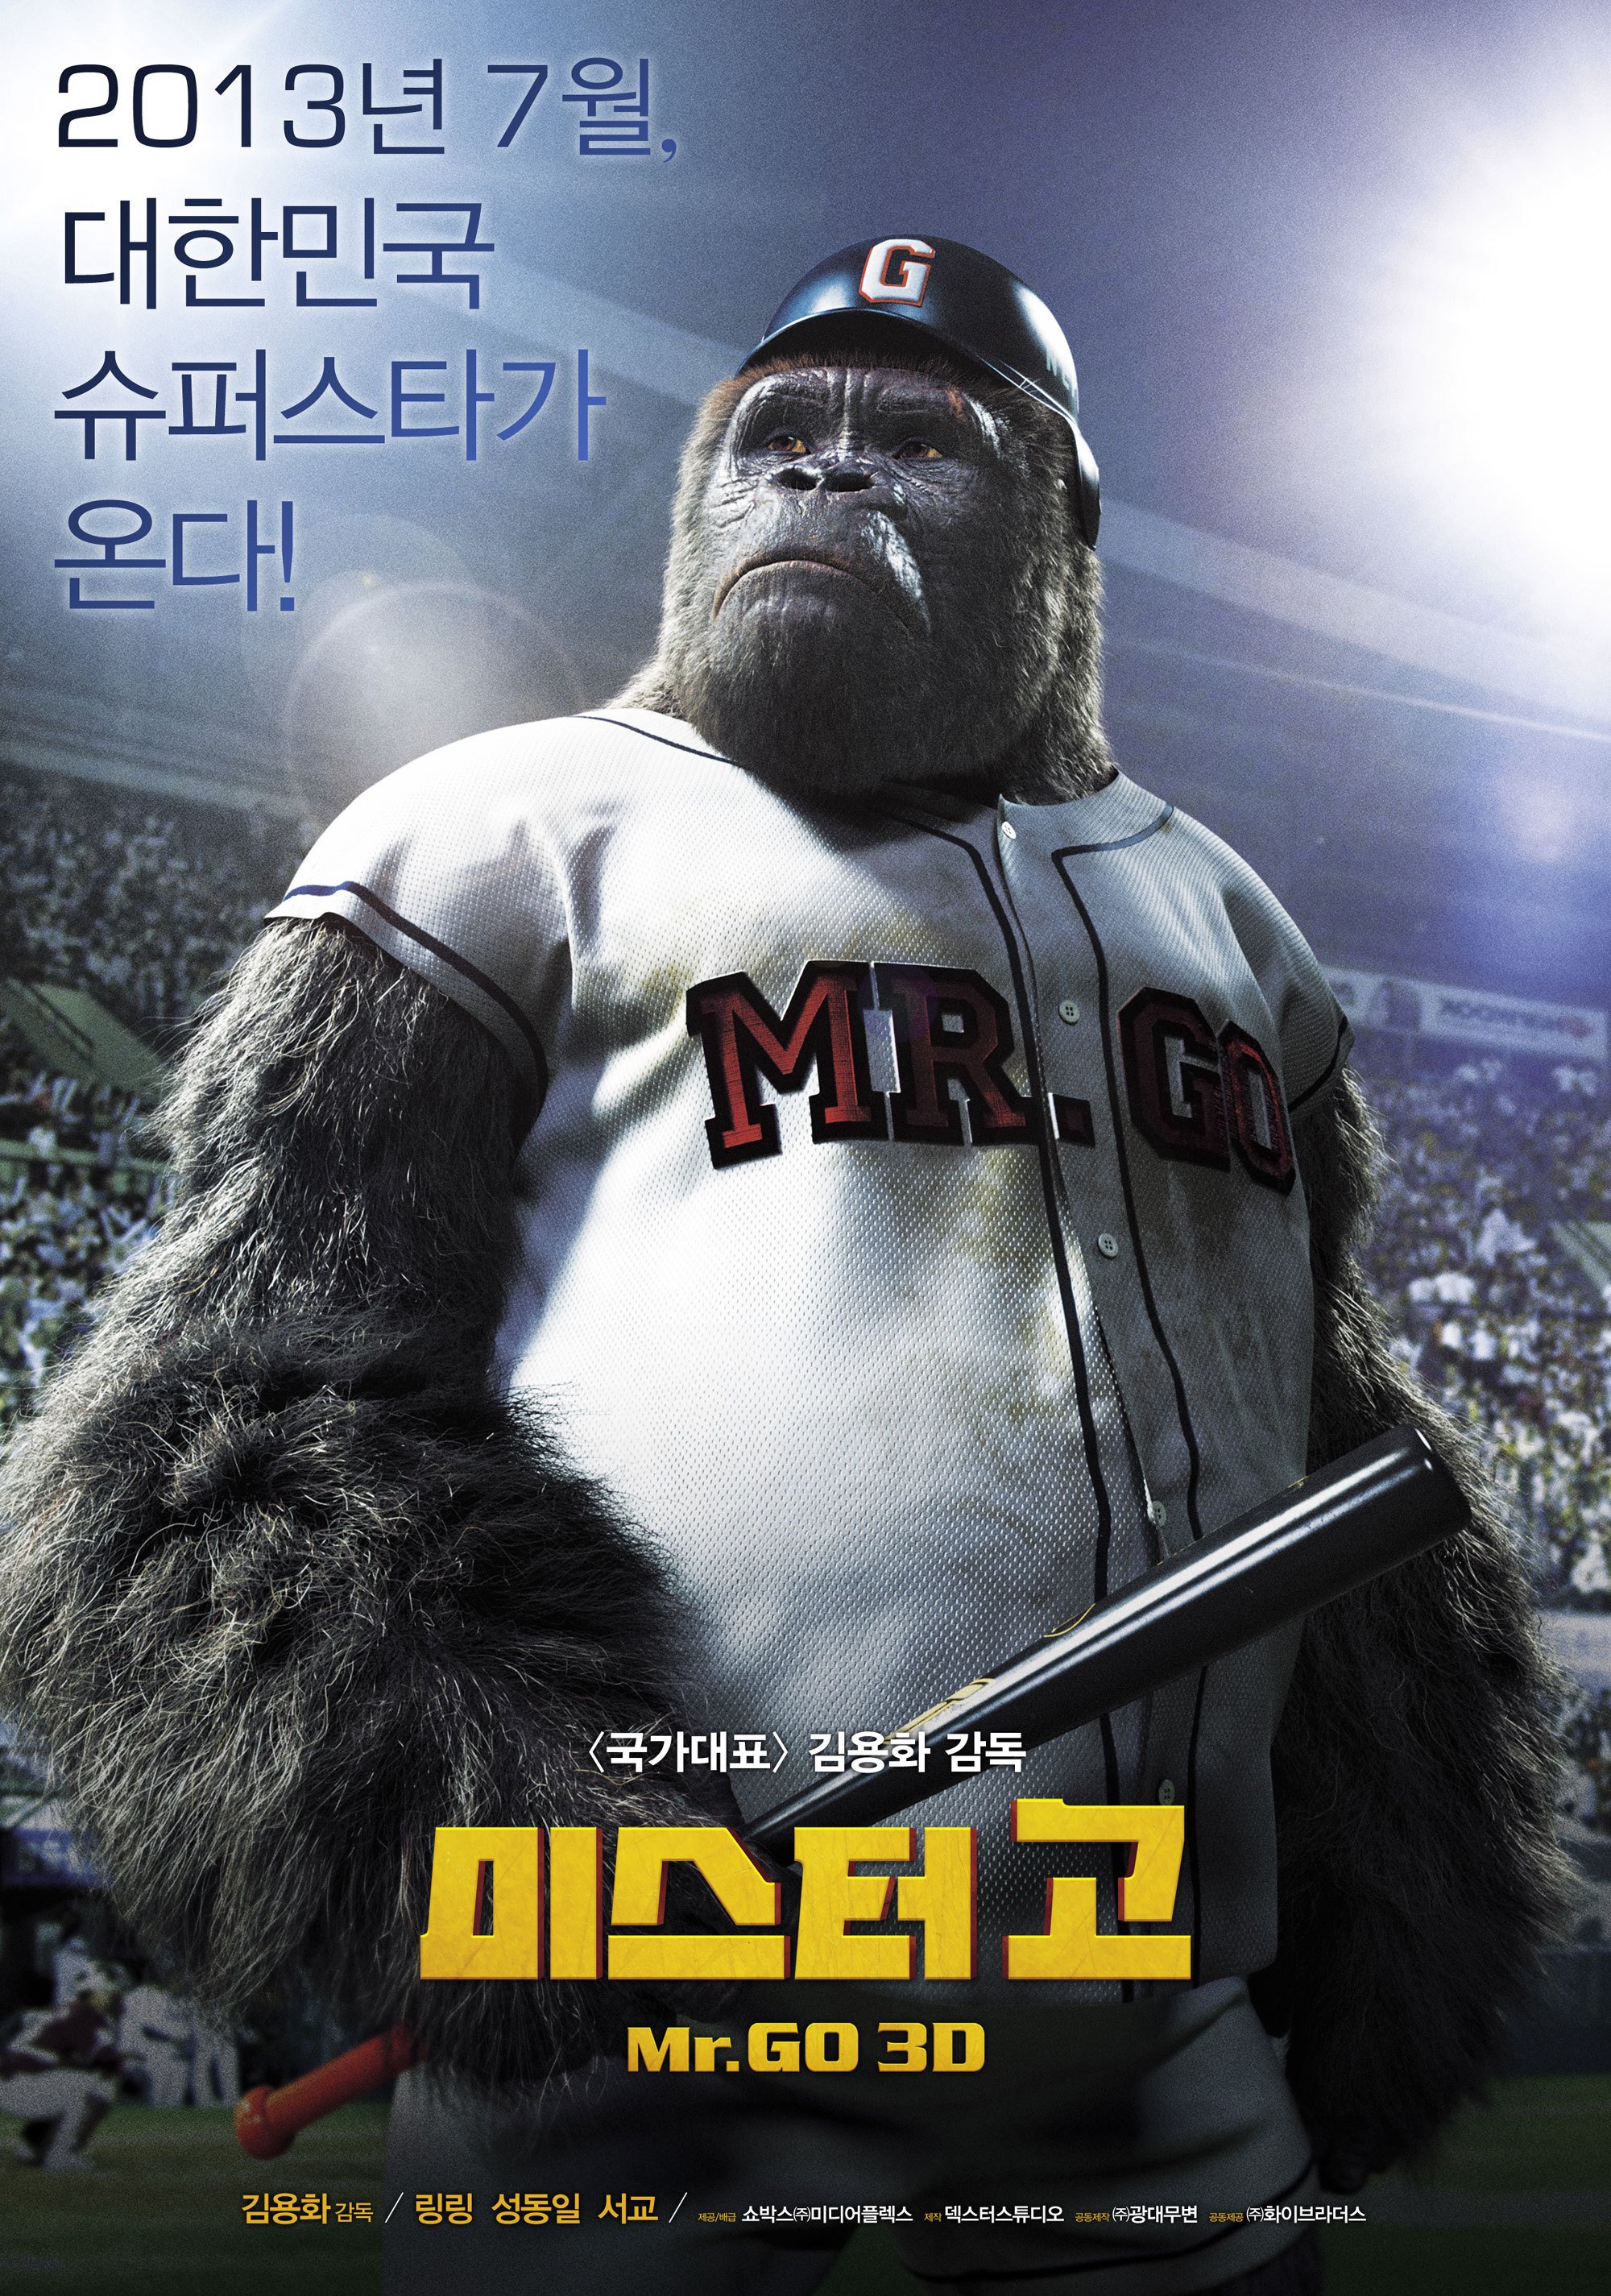 A poster for the movie Mr. Go